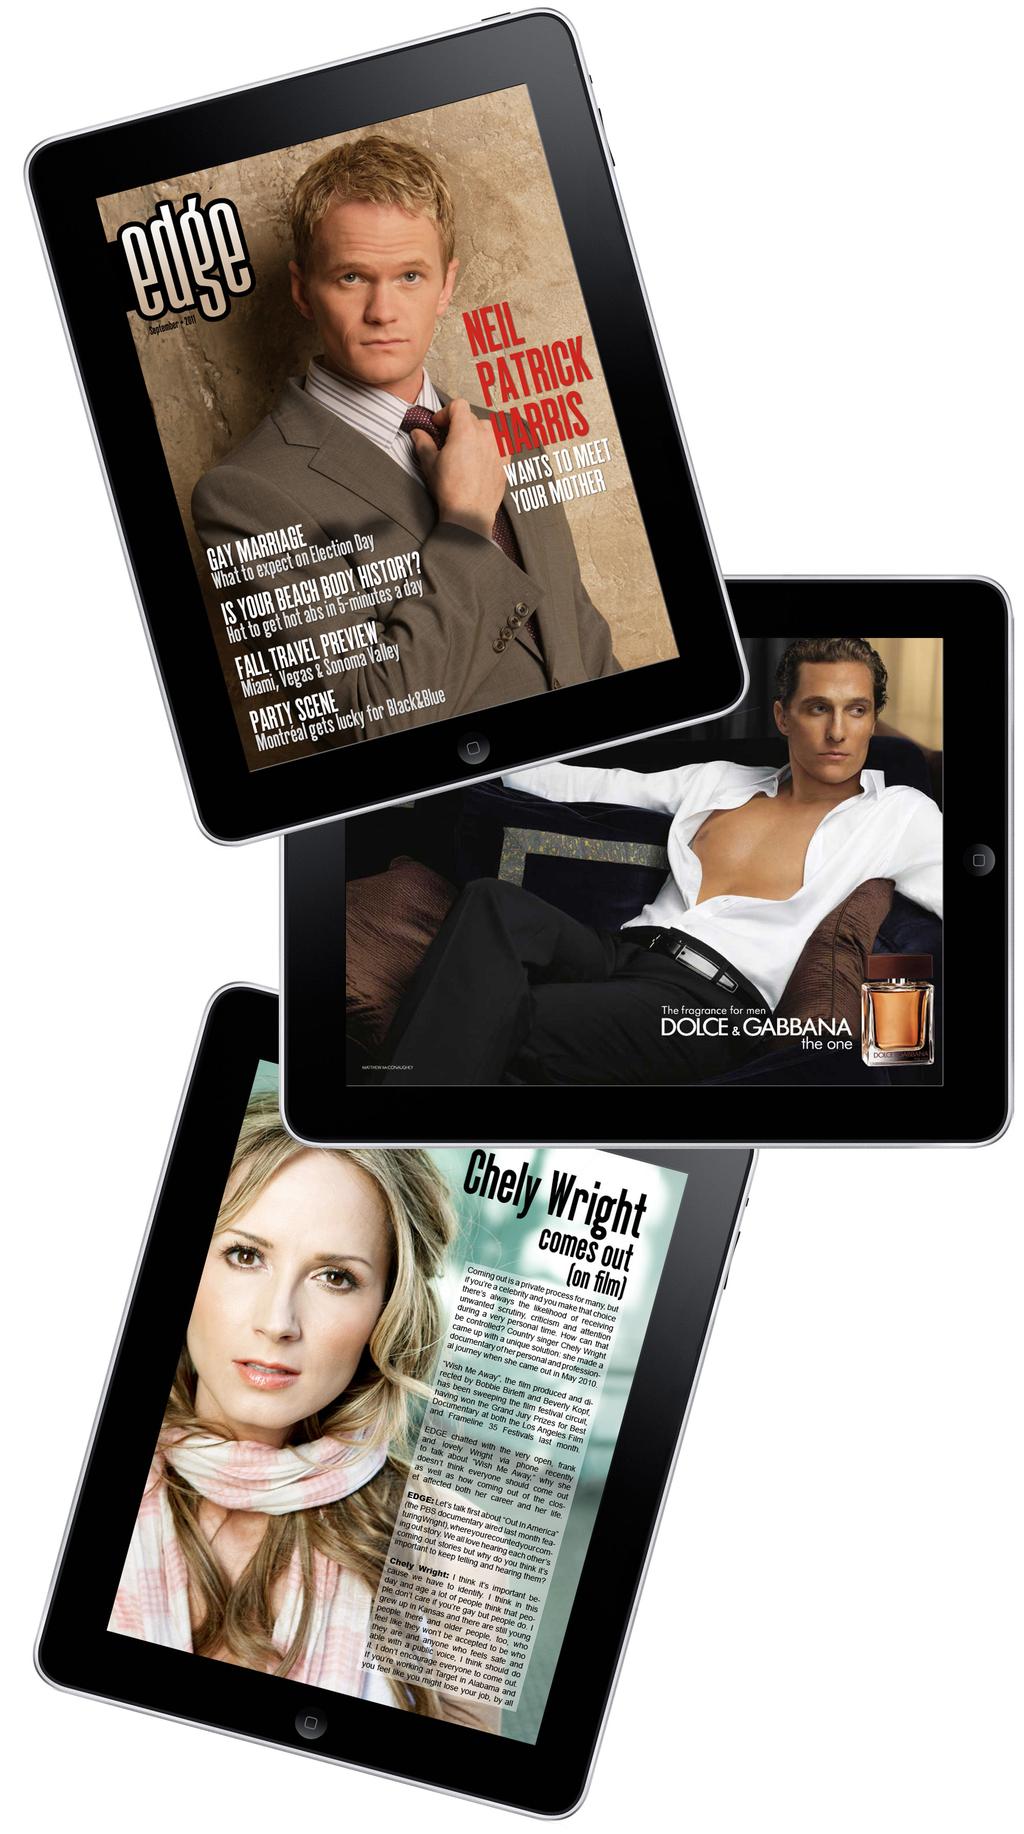 Digitial Magazine The EDGE Digital Magazine The Next Generation of LGBT Media In September 2011, EDGE launched the first-ever LGBT magazine designed exclusively for digital tablets.